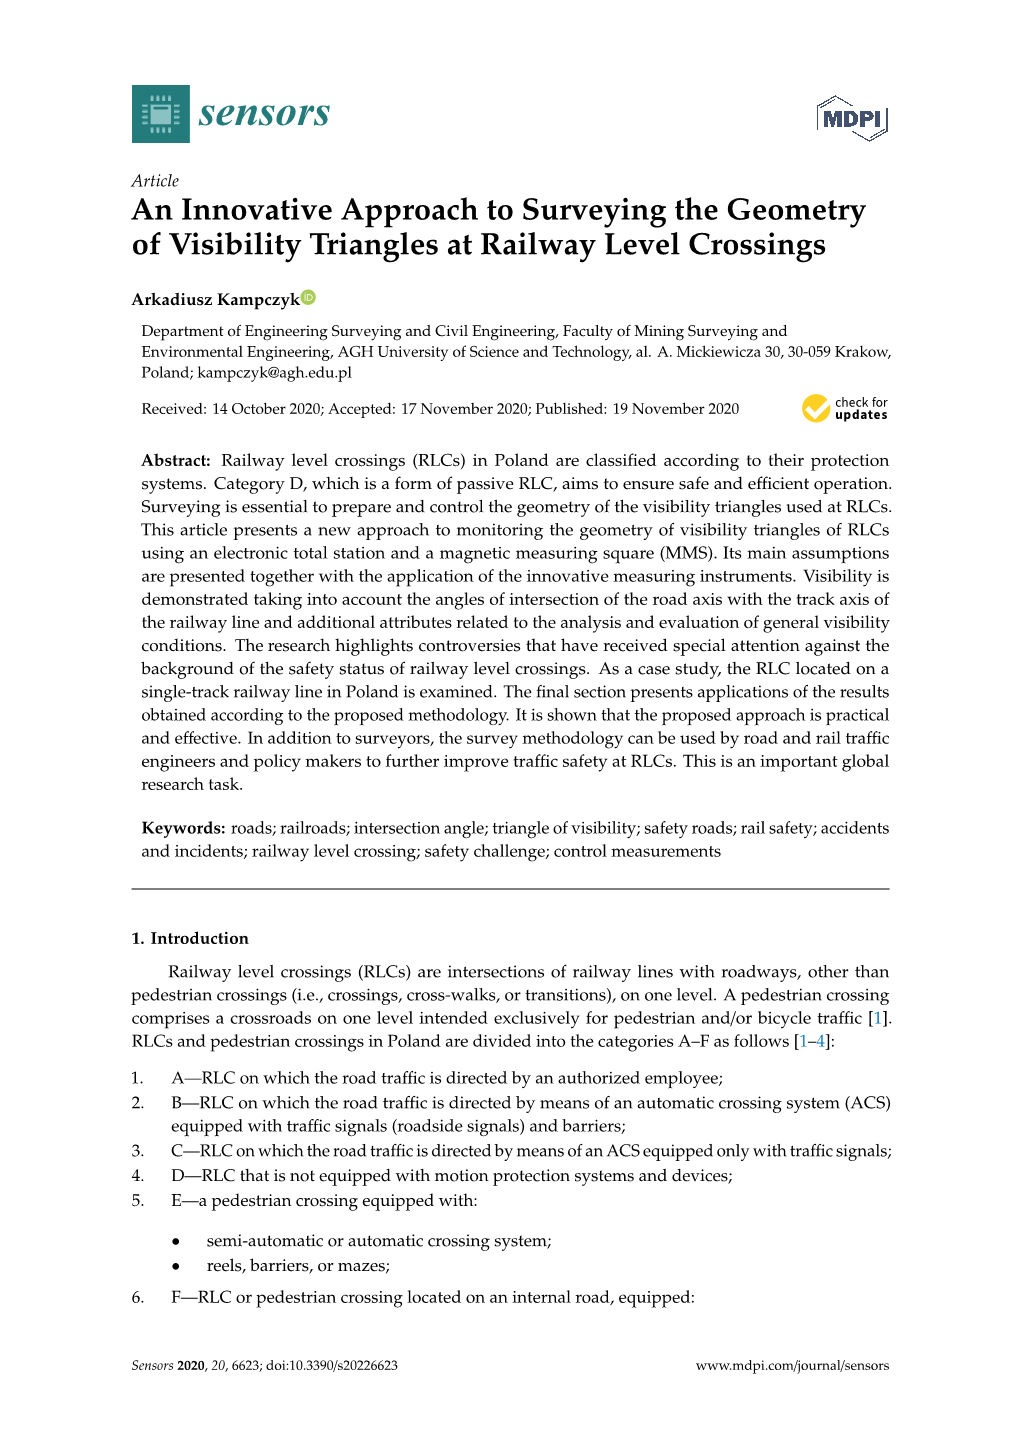 An Innovative Approach to Surveying the Geometry of Visibility Triangles at Railway Level Crossings